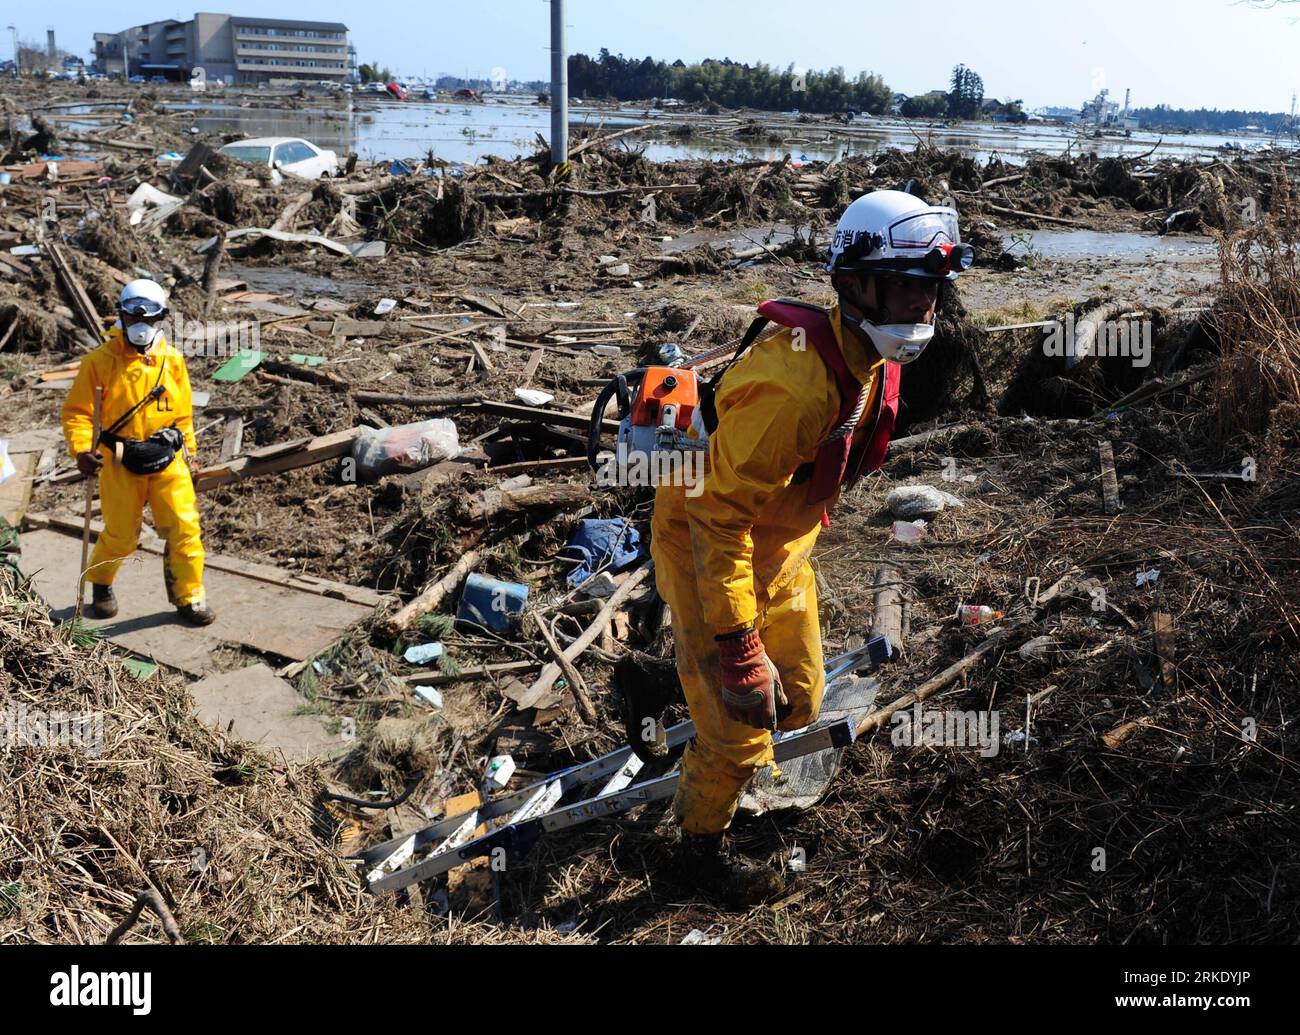 Bildnummer: 55019328  Datum: 13.03.2011  Copyright: imago/Xinhua SENDAI, March 13, 2011 (Xinhua) -- Rescuers work at Sanbontsuka of Wakabayashi in Sendai City, Miyagi Prefecture, Japan, March 13, 2011. The area lost contact with the outside world after Friday s quake. Friday s catastrophic earthquake in Japan and the following devastating tsunami have ravaged the country, while massive rescue and recovery efforts have been quickly launched to save lives and minimize losses. (Xinhua/Ji Chunpeng)(yc) JAPAN-QUAKE PUBLICATIONxNOTxINxCHN Gesellschaft Naturkatastrophe Erdbeben Tsunami kbdig xsk 2011 Stock Photo